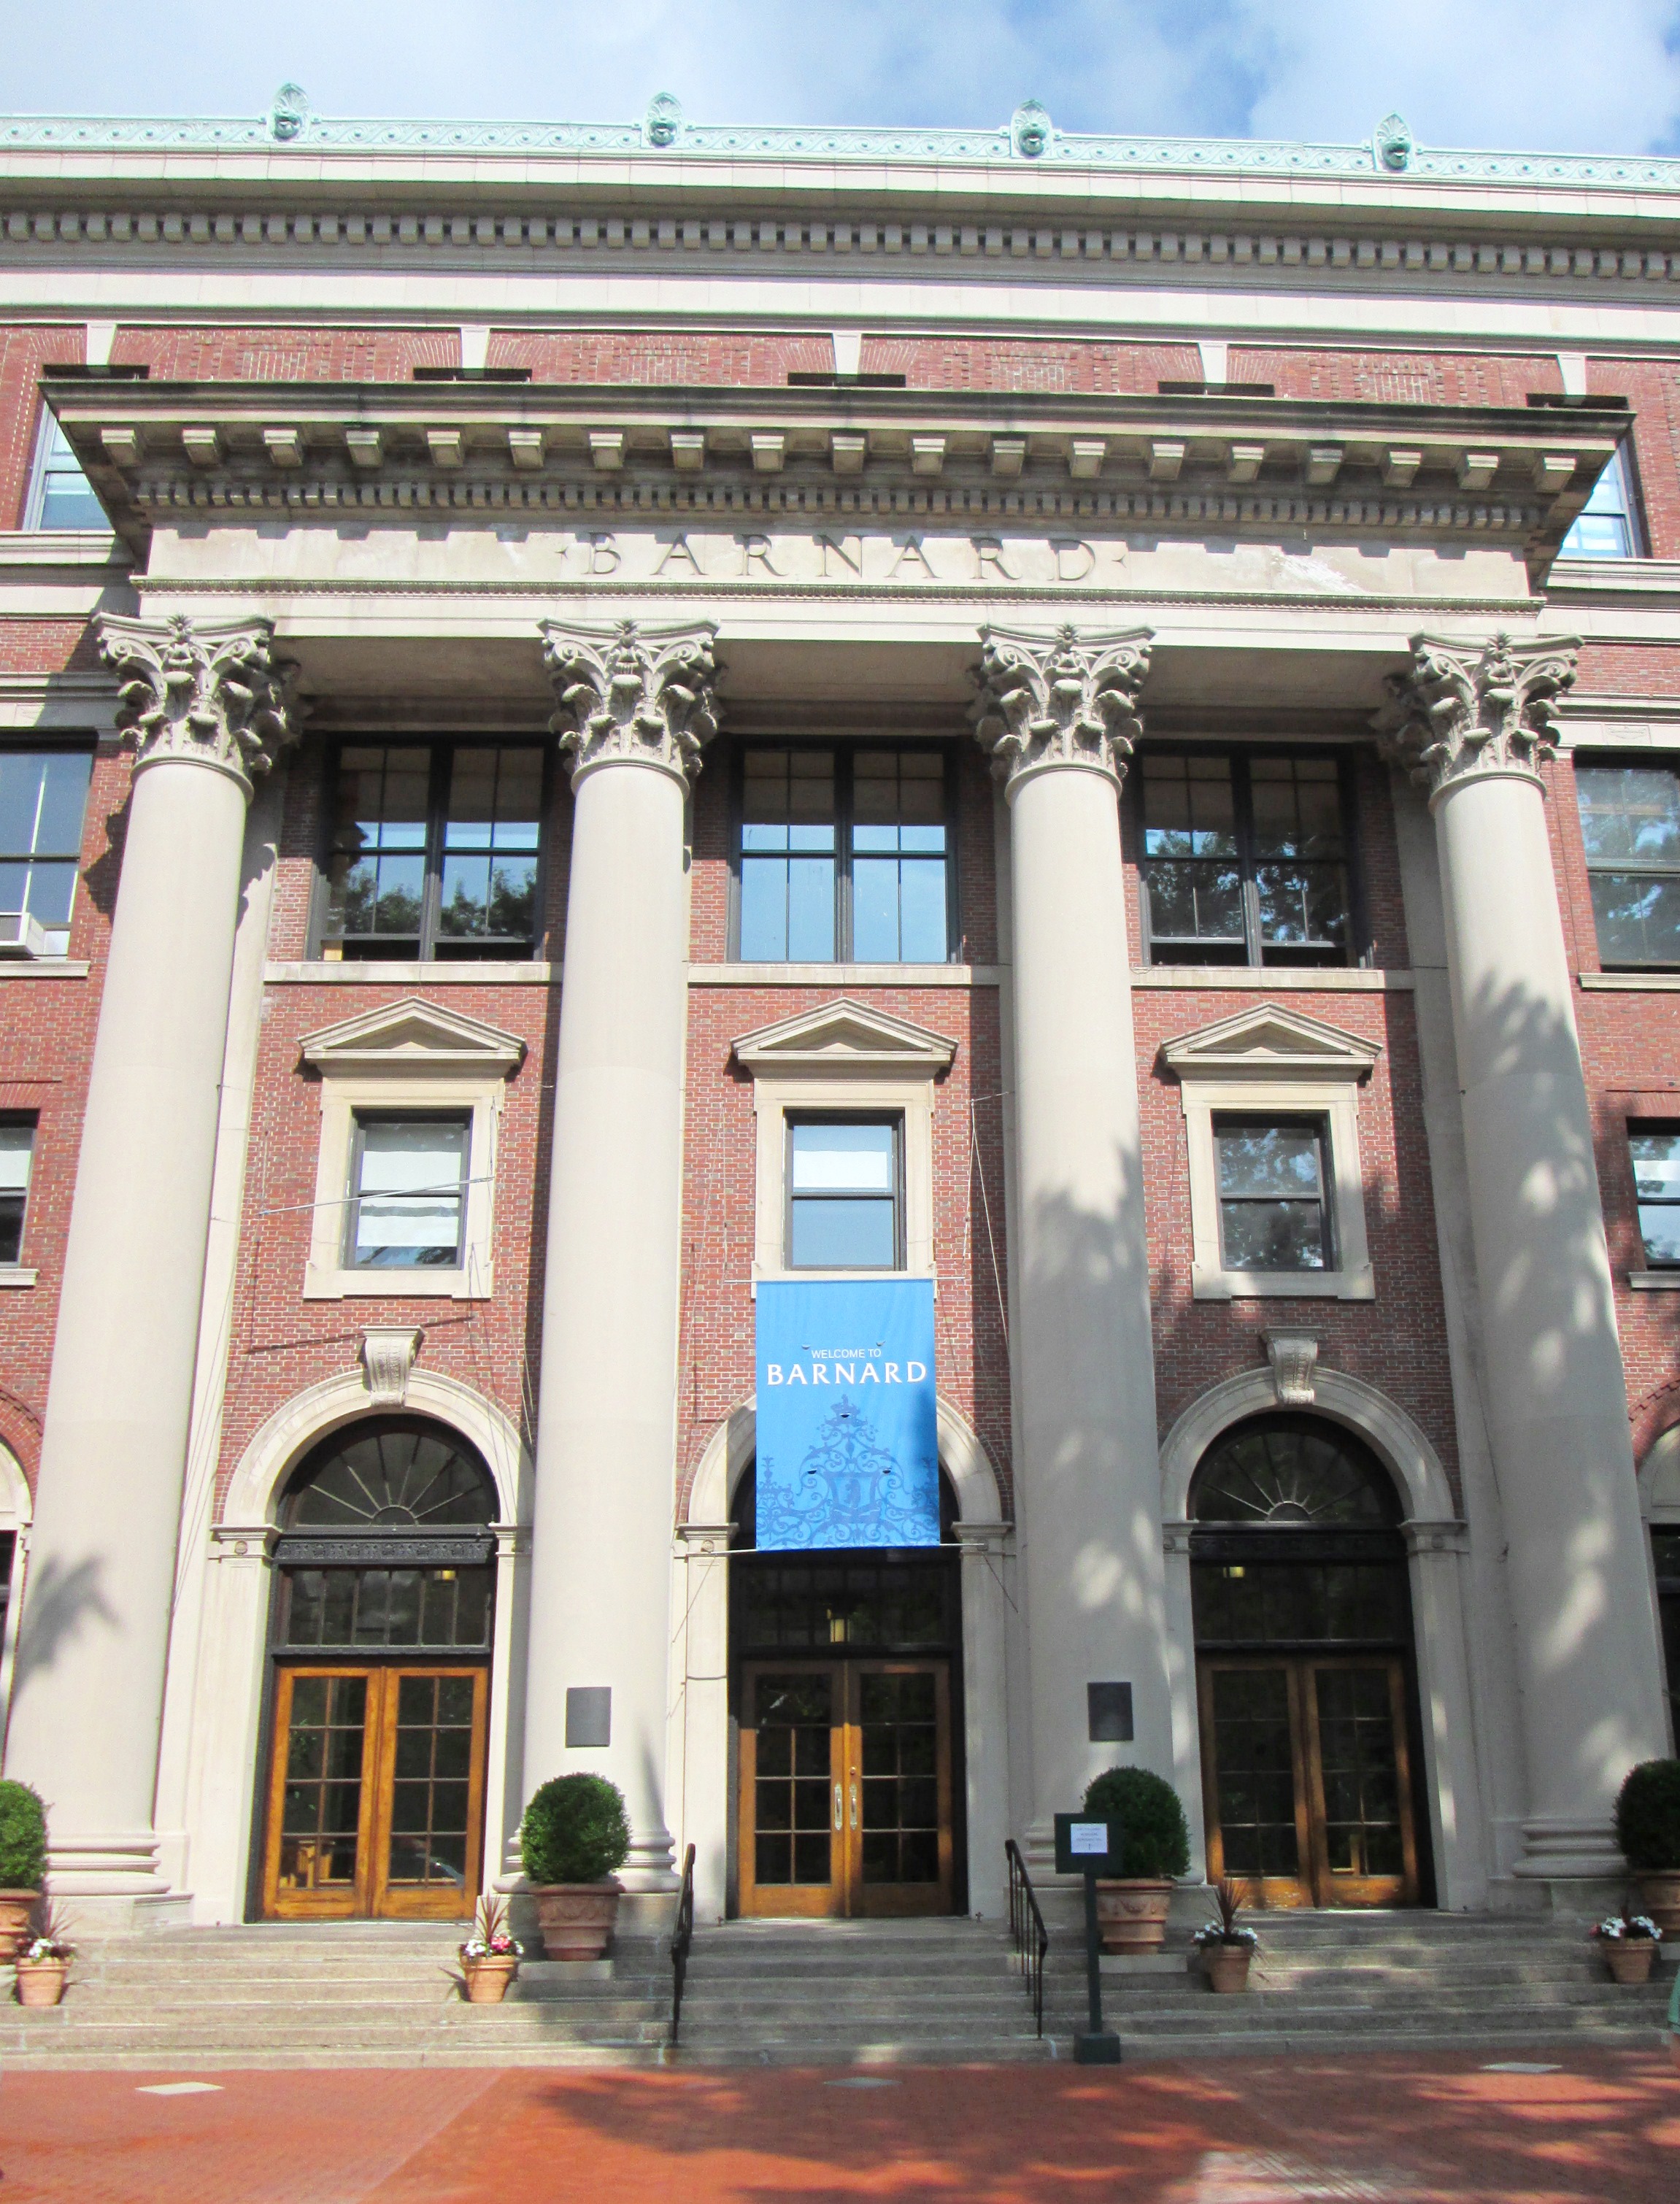 barnard-college-to-host-event-featuring-group-that-has-alleged-ties-to